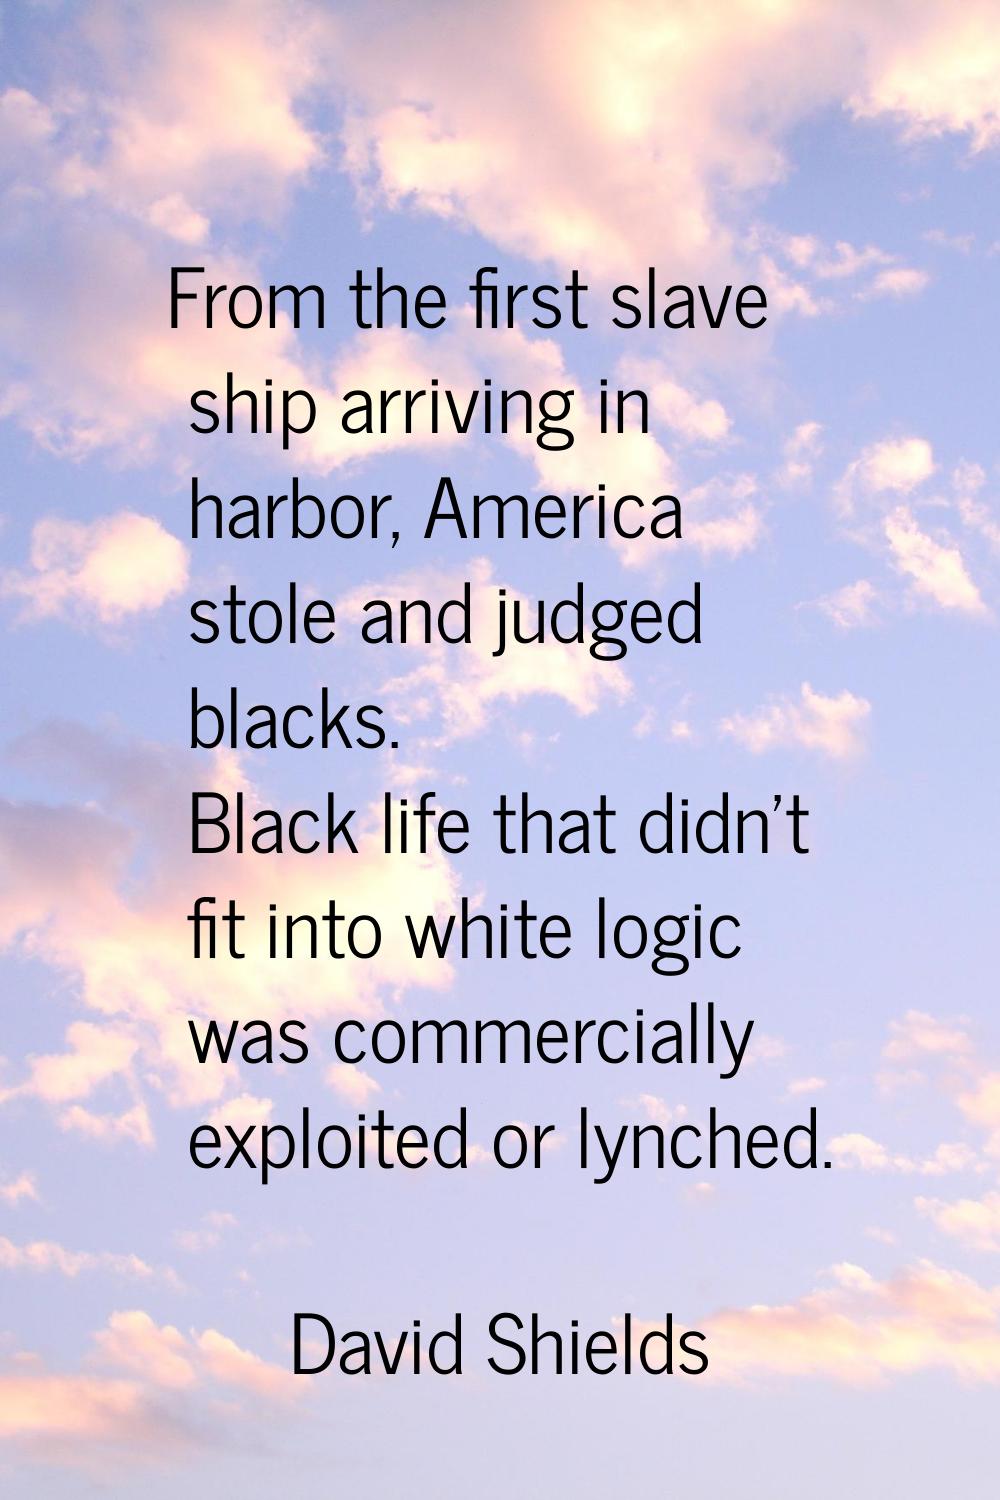 From the first slave ship arriving in harbor, America stole and judged blacks. Black life that didn